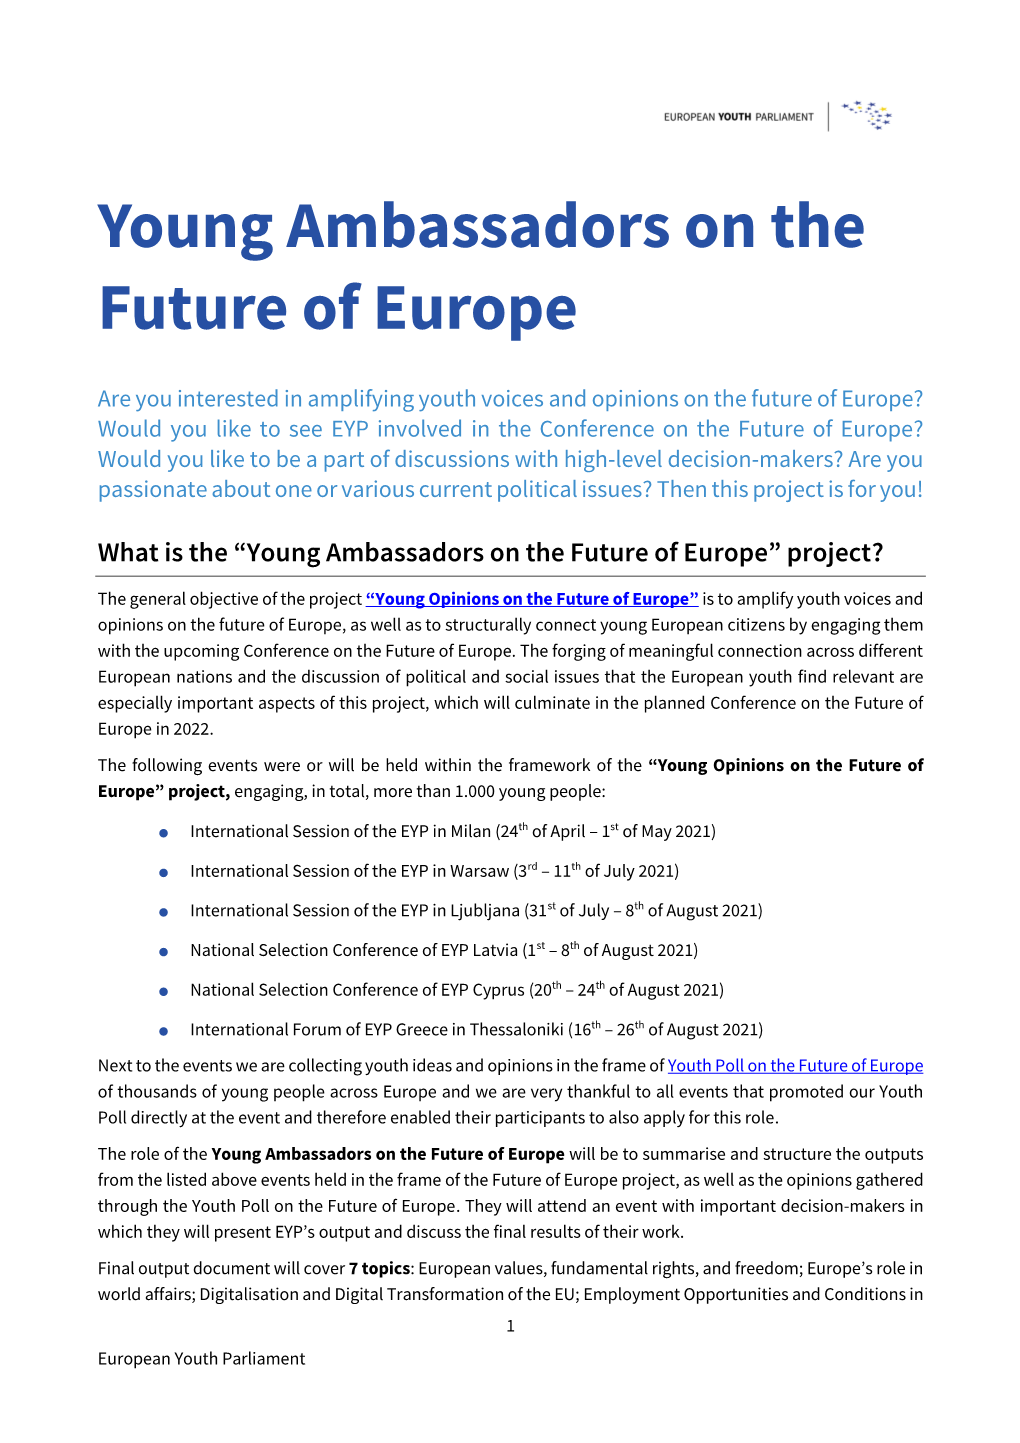 Young Ambassadors on the Future of Europe